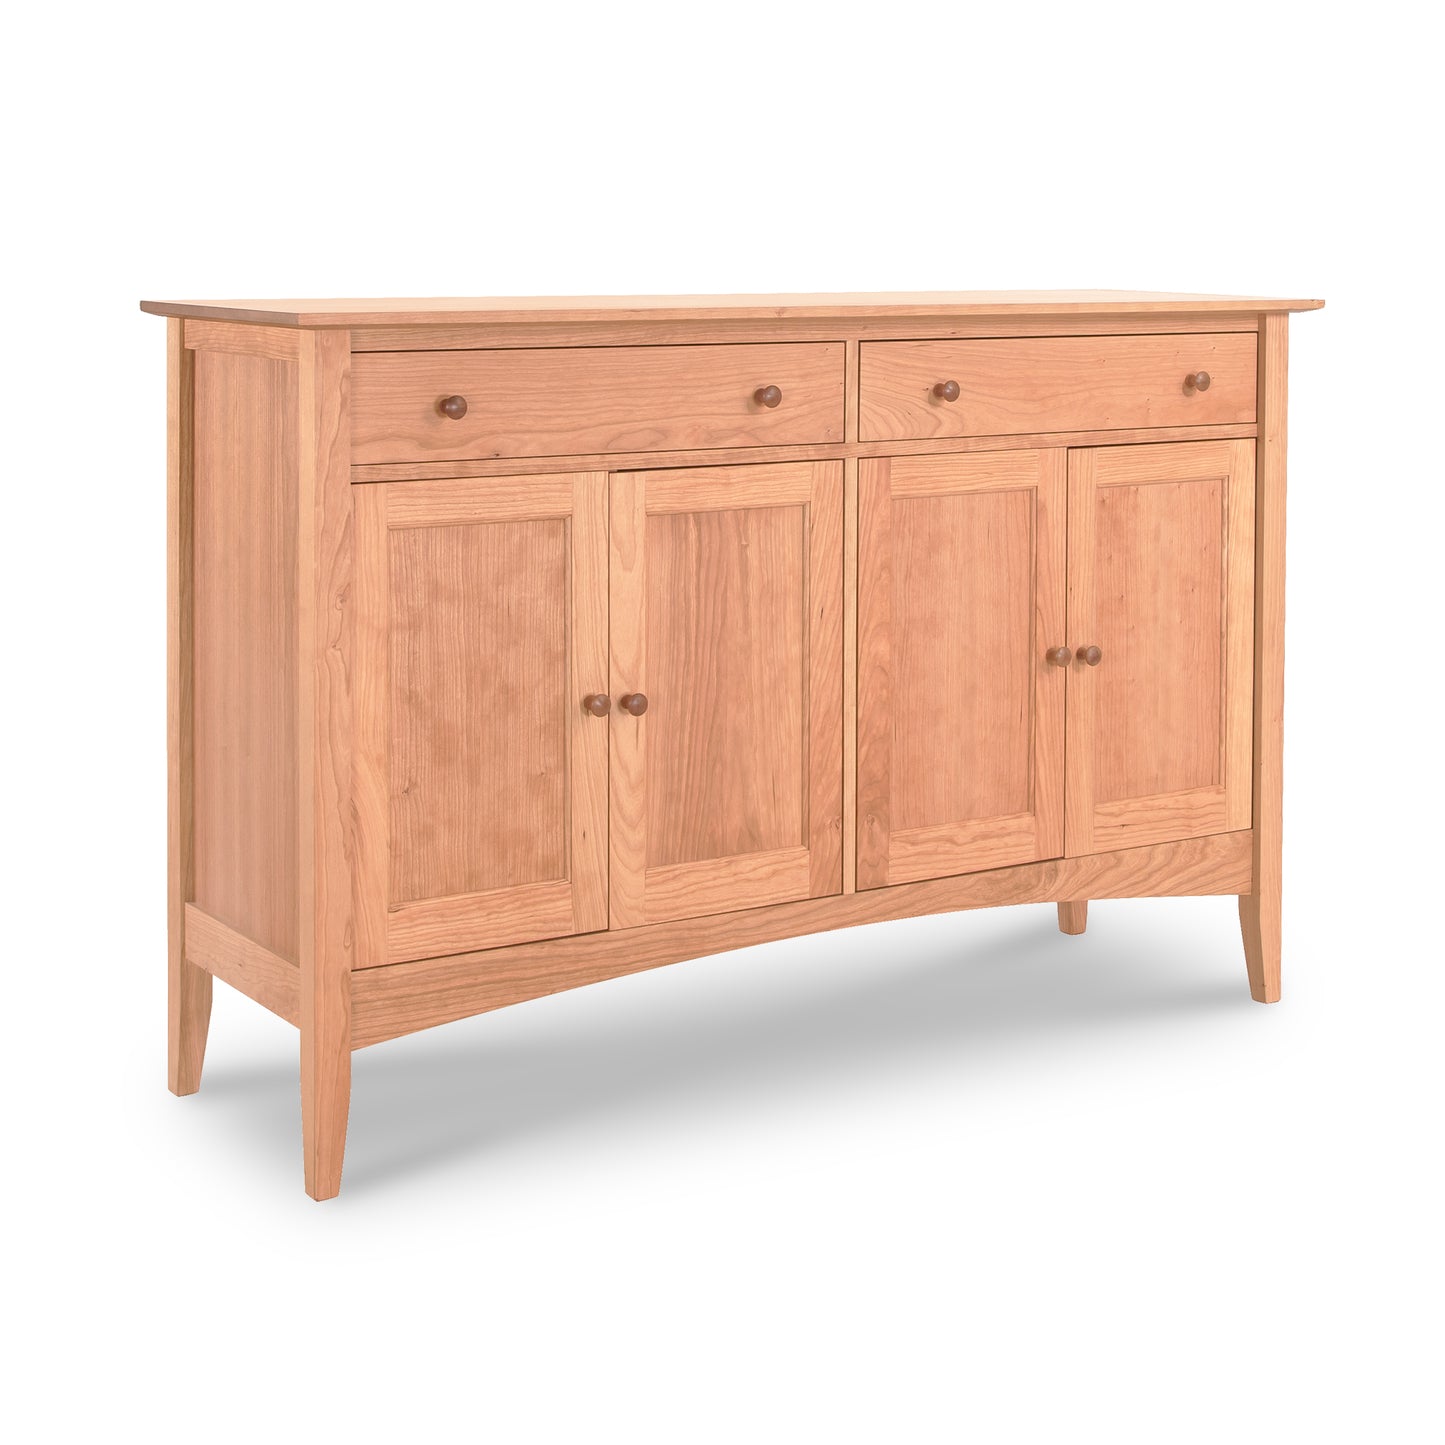 A Maple Corner Woodworks American Shaker Sideboard with a natural finish, featuring two small drawers on the top and three cabinets below, crafted with Vermont craftsmanship, set against a plain white background.